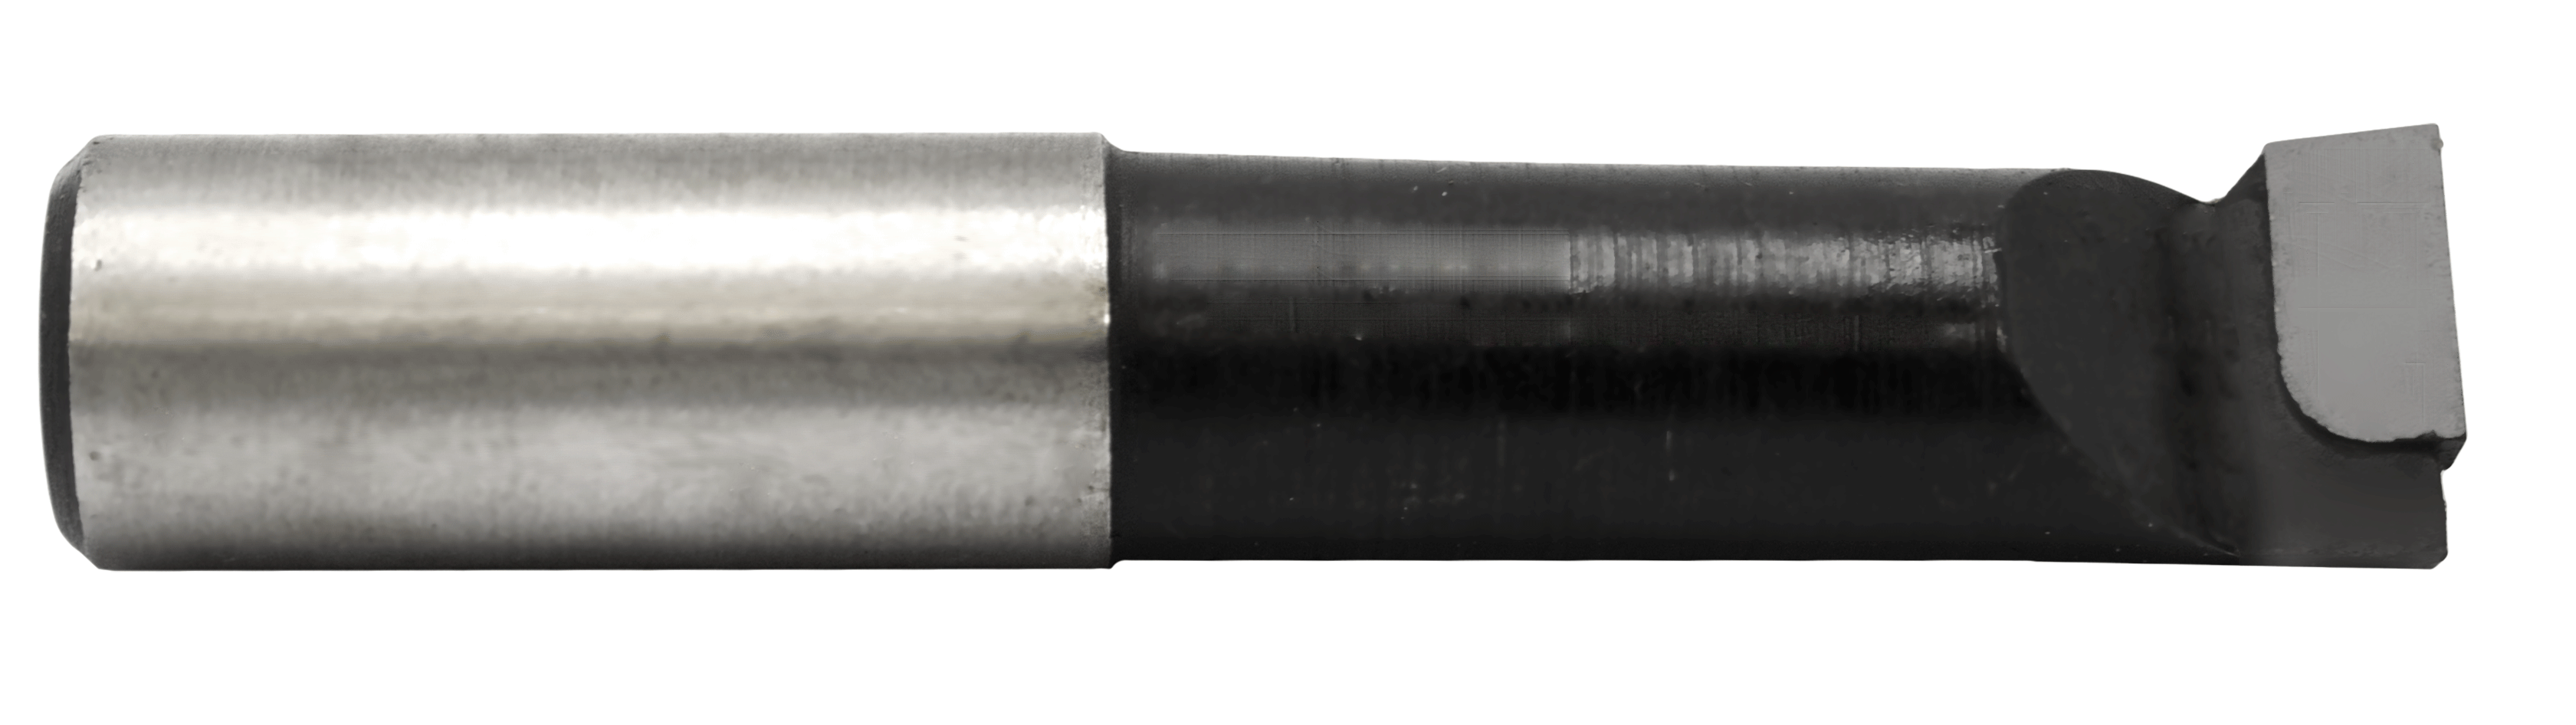 Super-Bore 8mm" C-6 for Steel Applications